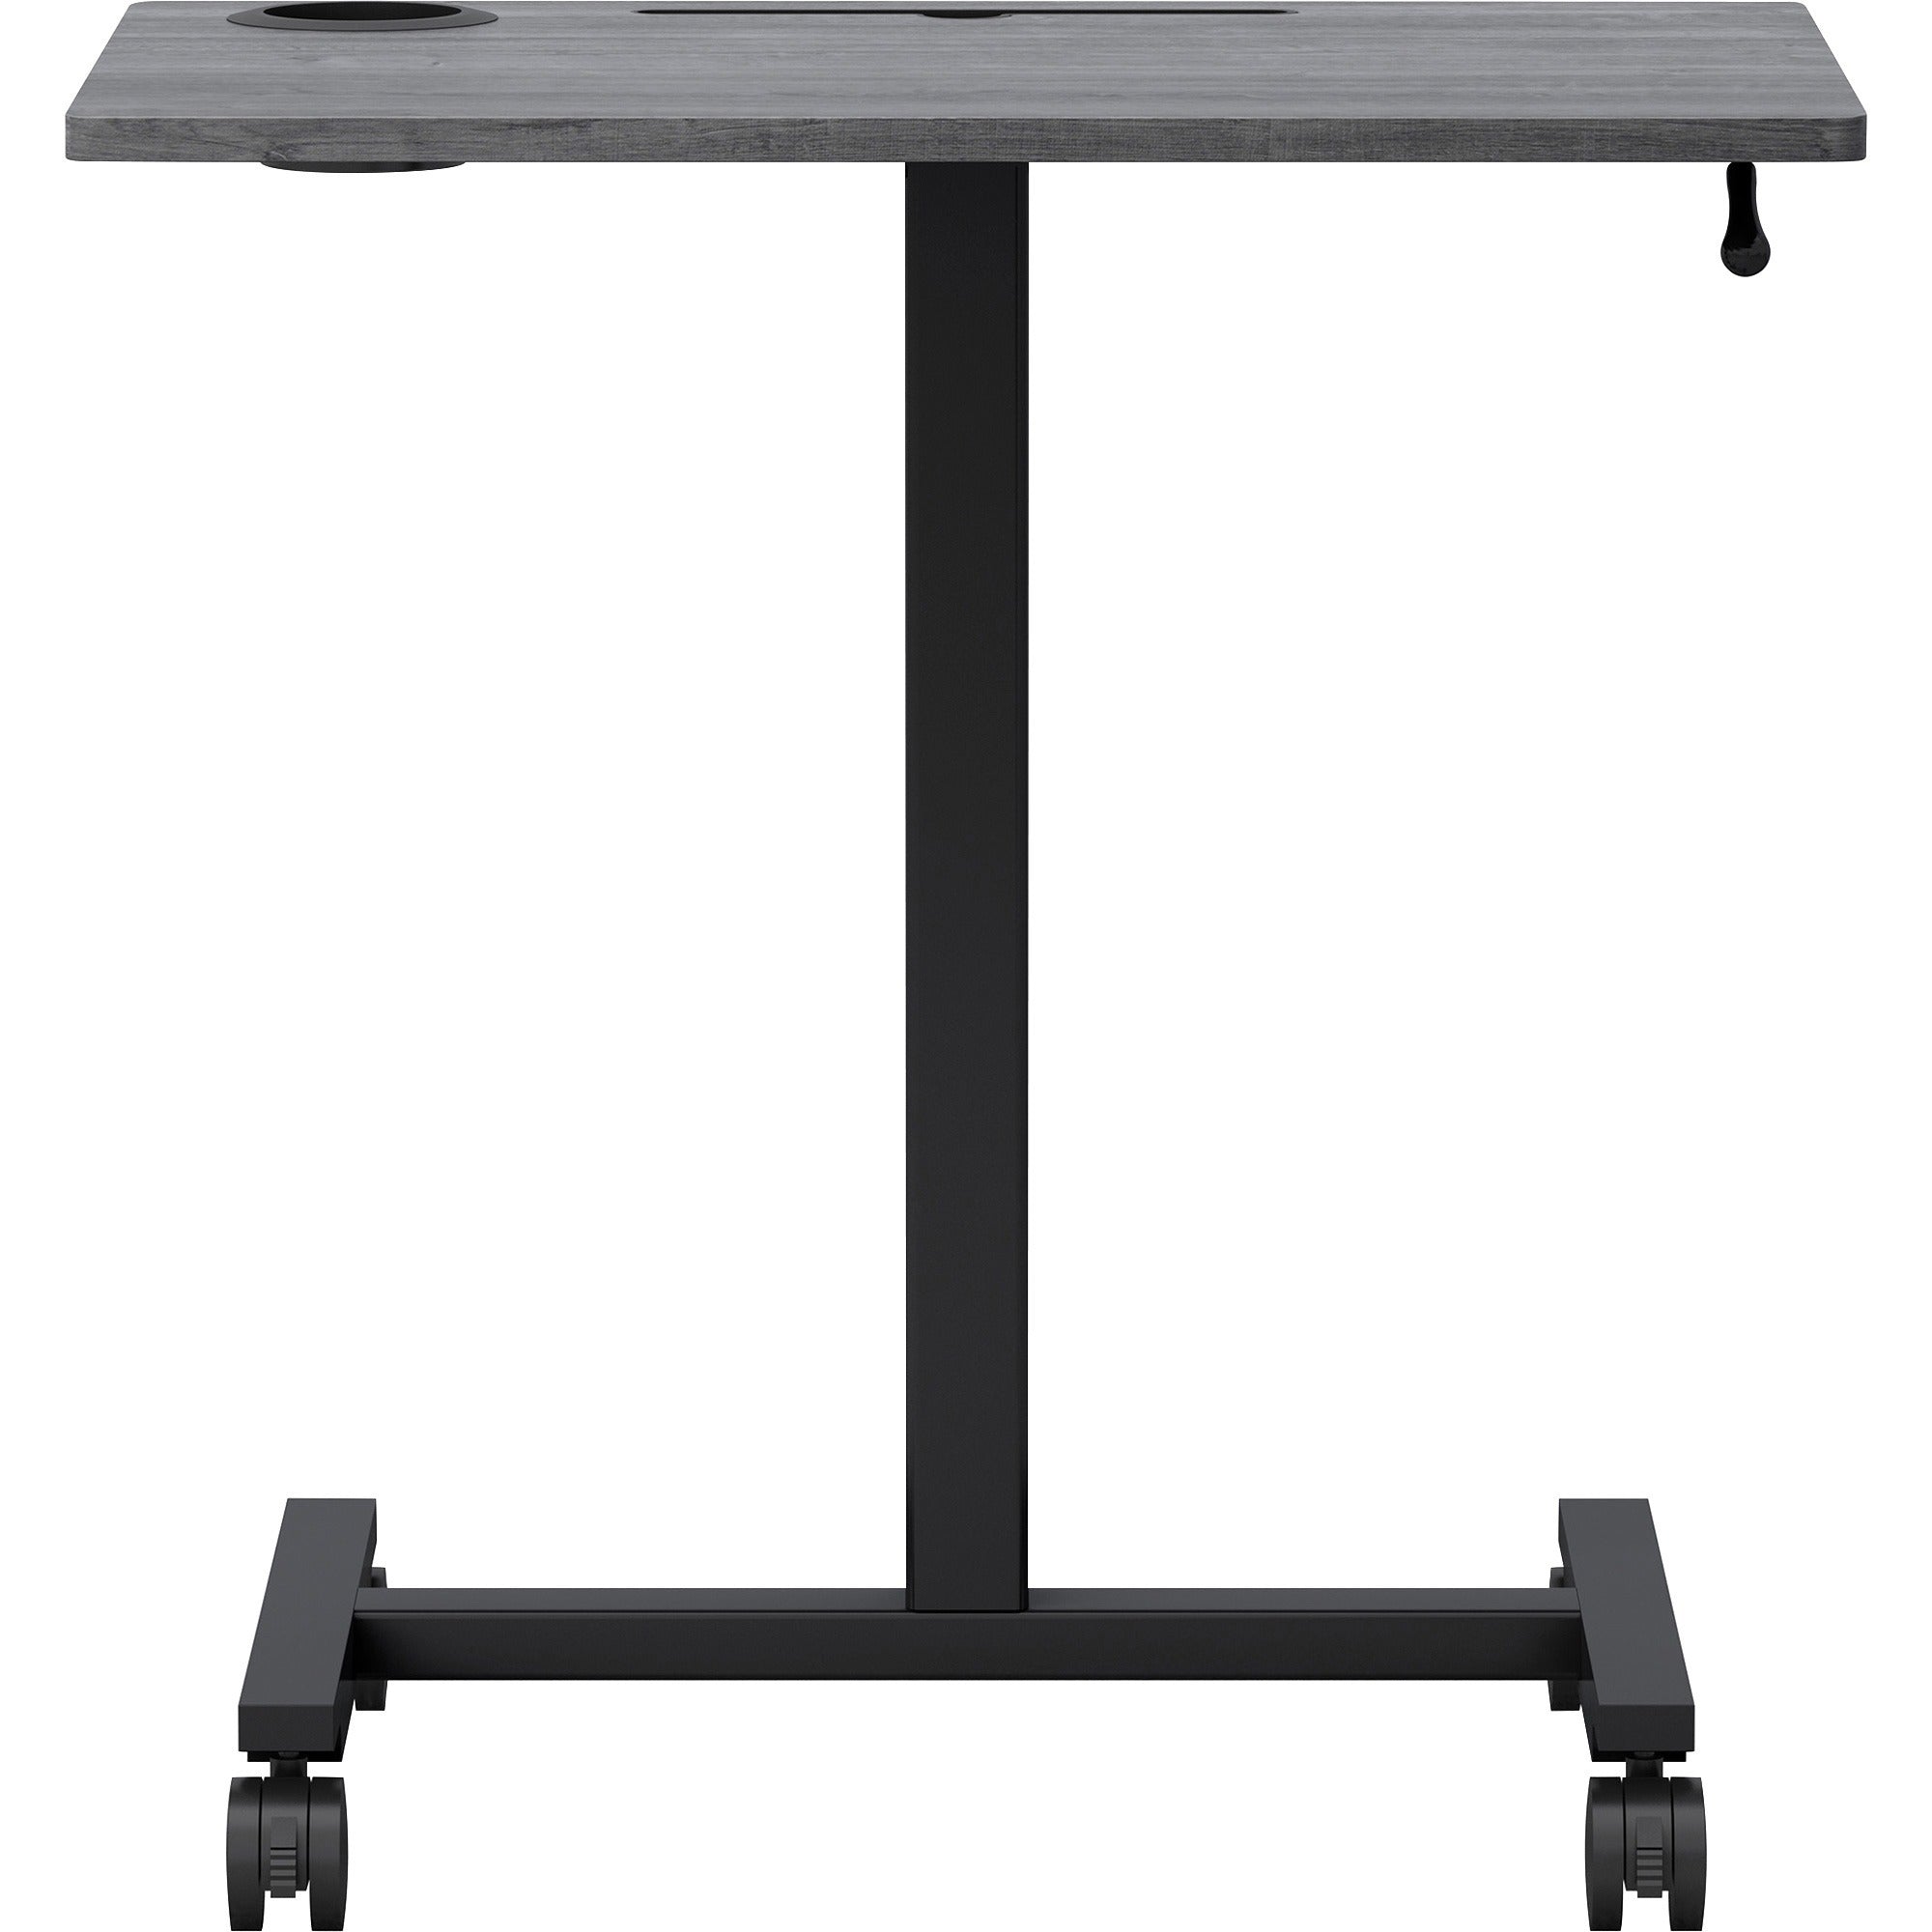 lorell-height-adjustable-mobile-desk-for-table-topweathered-charcoal-laminate-top-powder-coated-base-adjustable-height-30-to-4363-adjustment-43-height-x-2663-width-x-1913-depth-assembly-required-1-each_llr84837 - 3